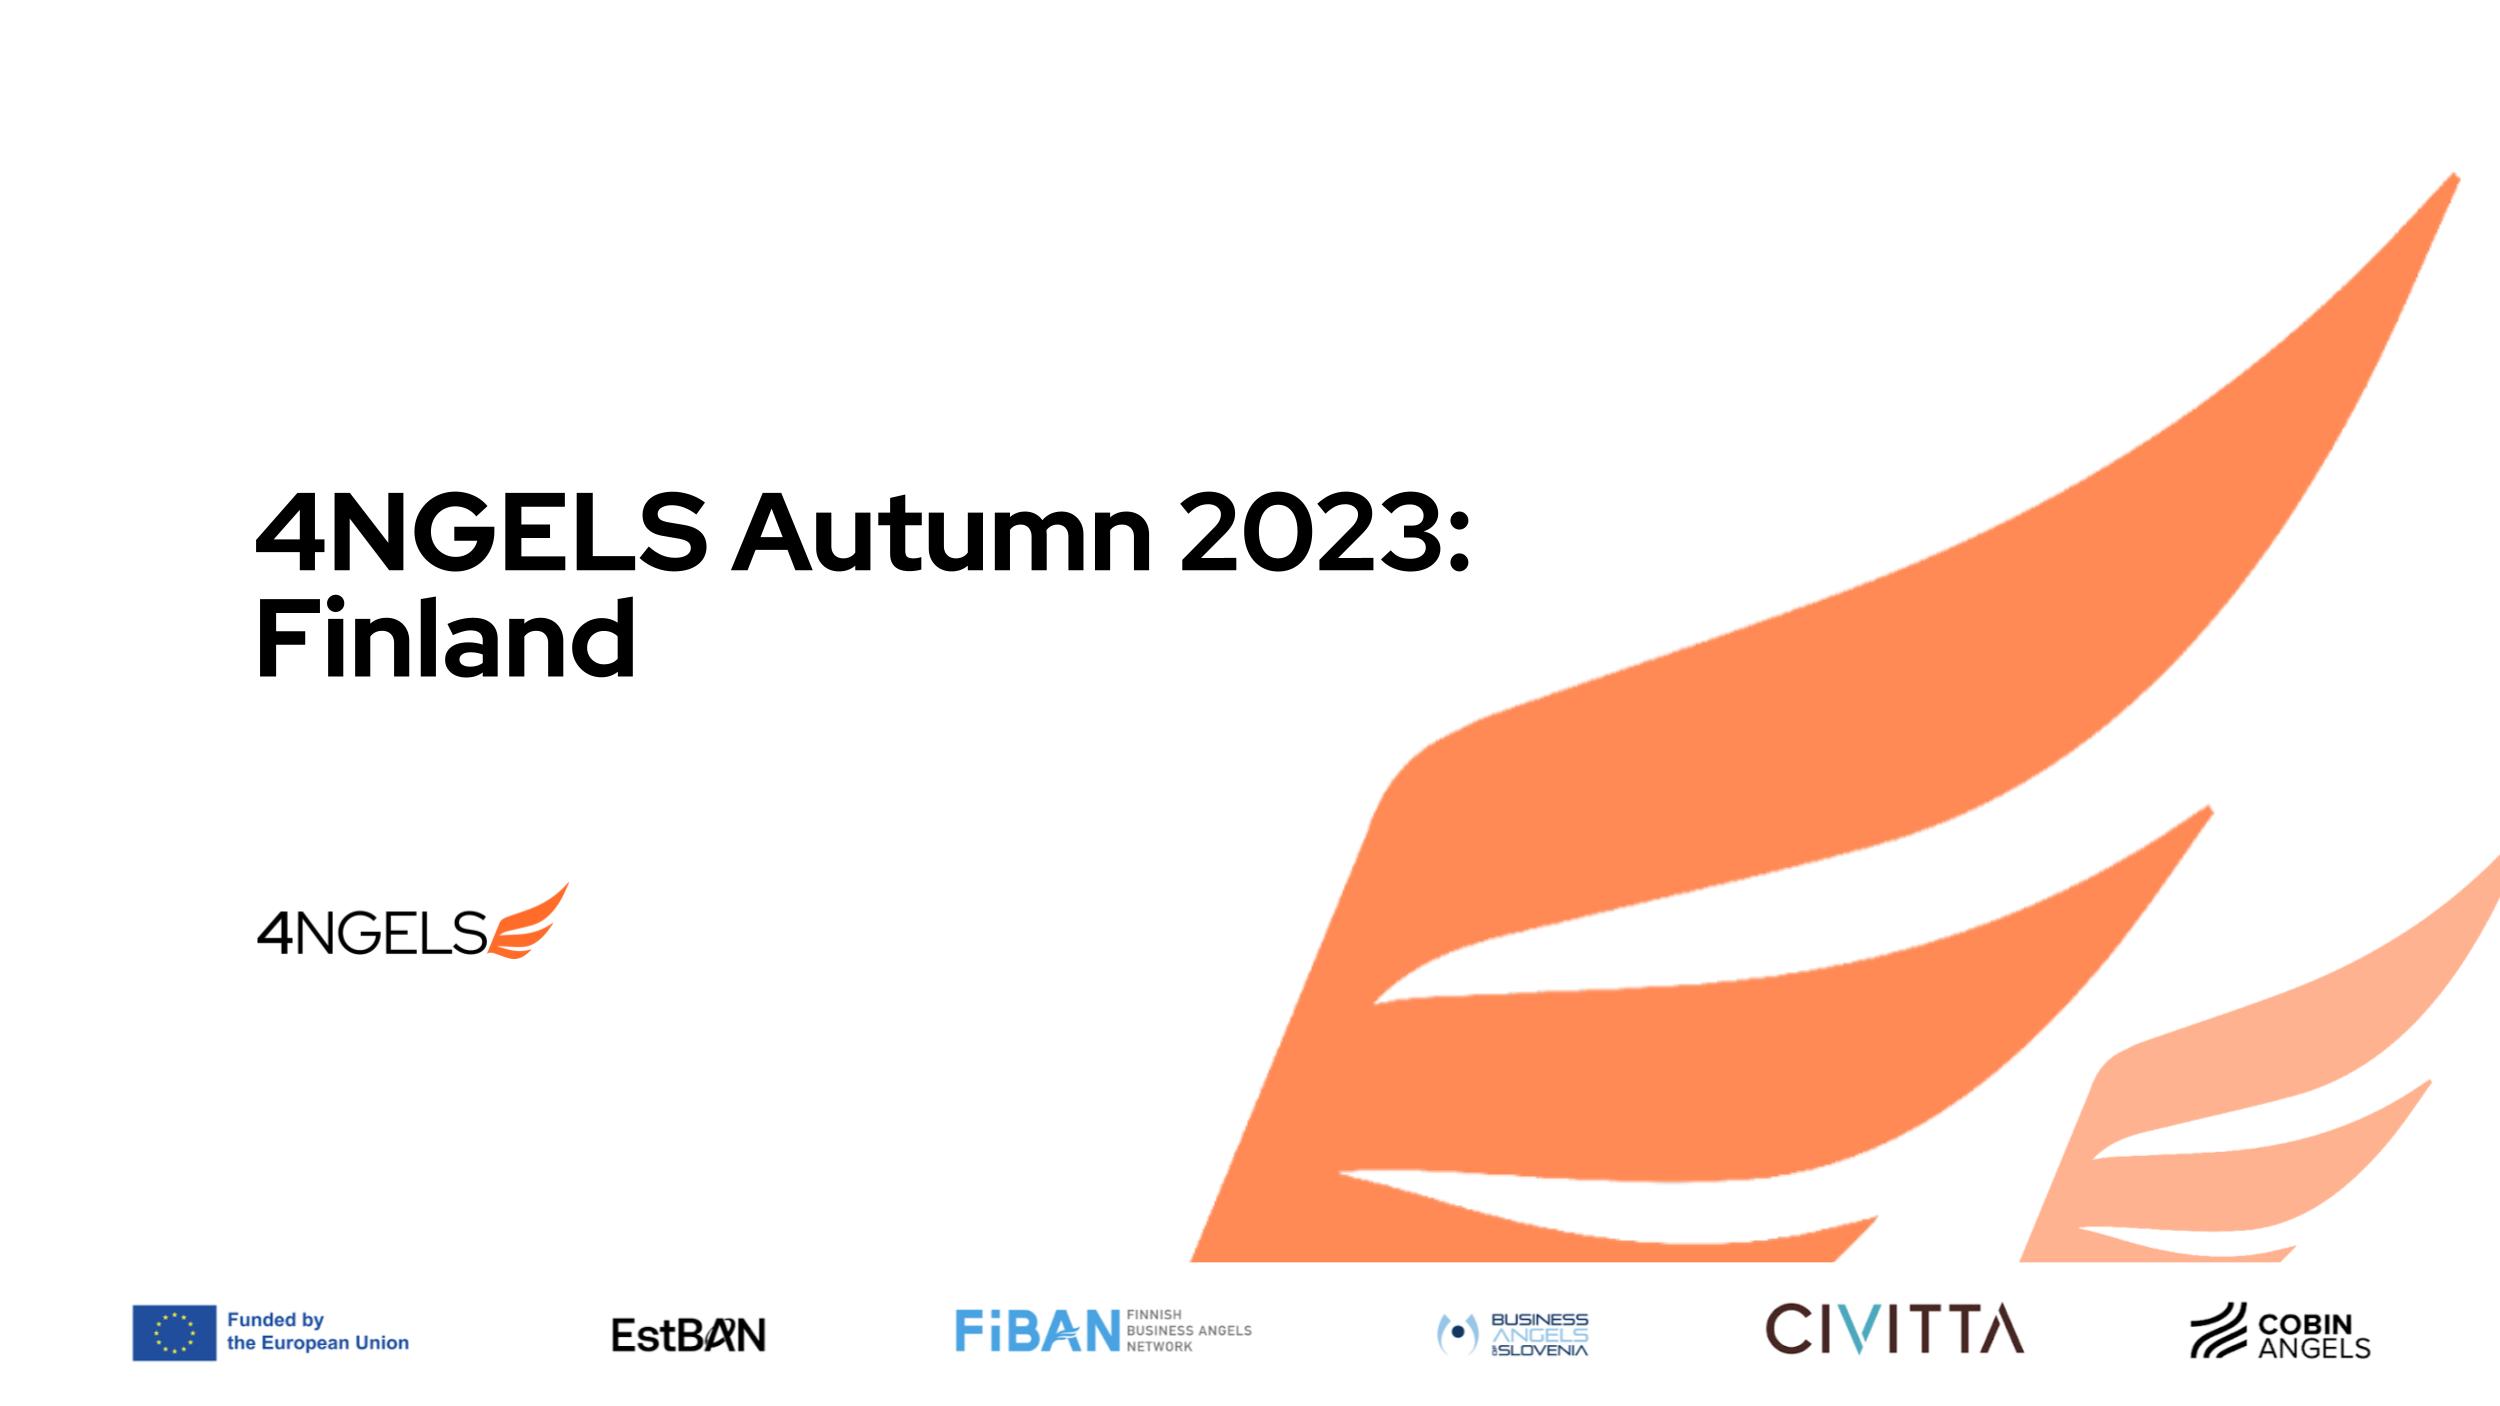 What is 4NGELS? 4NGELS is an EU-funded project that brings together four business angel networks Estonian Business Angels Network (EstBAN), Finnish Business Angels Network (FiBAN), Business Angels of Slovenia, COBIN Angels. The program is coordinated by CIVITTA.